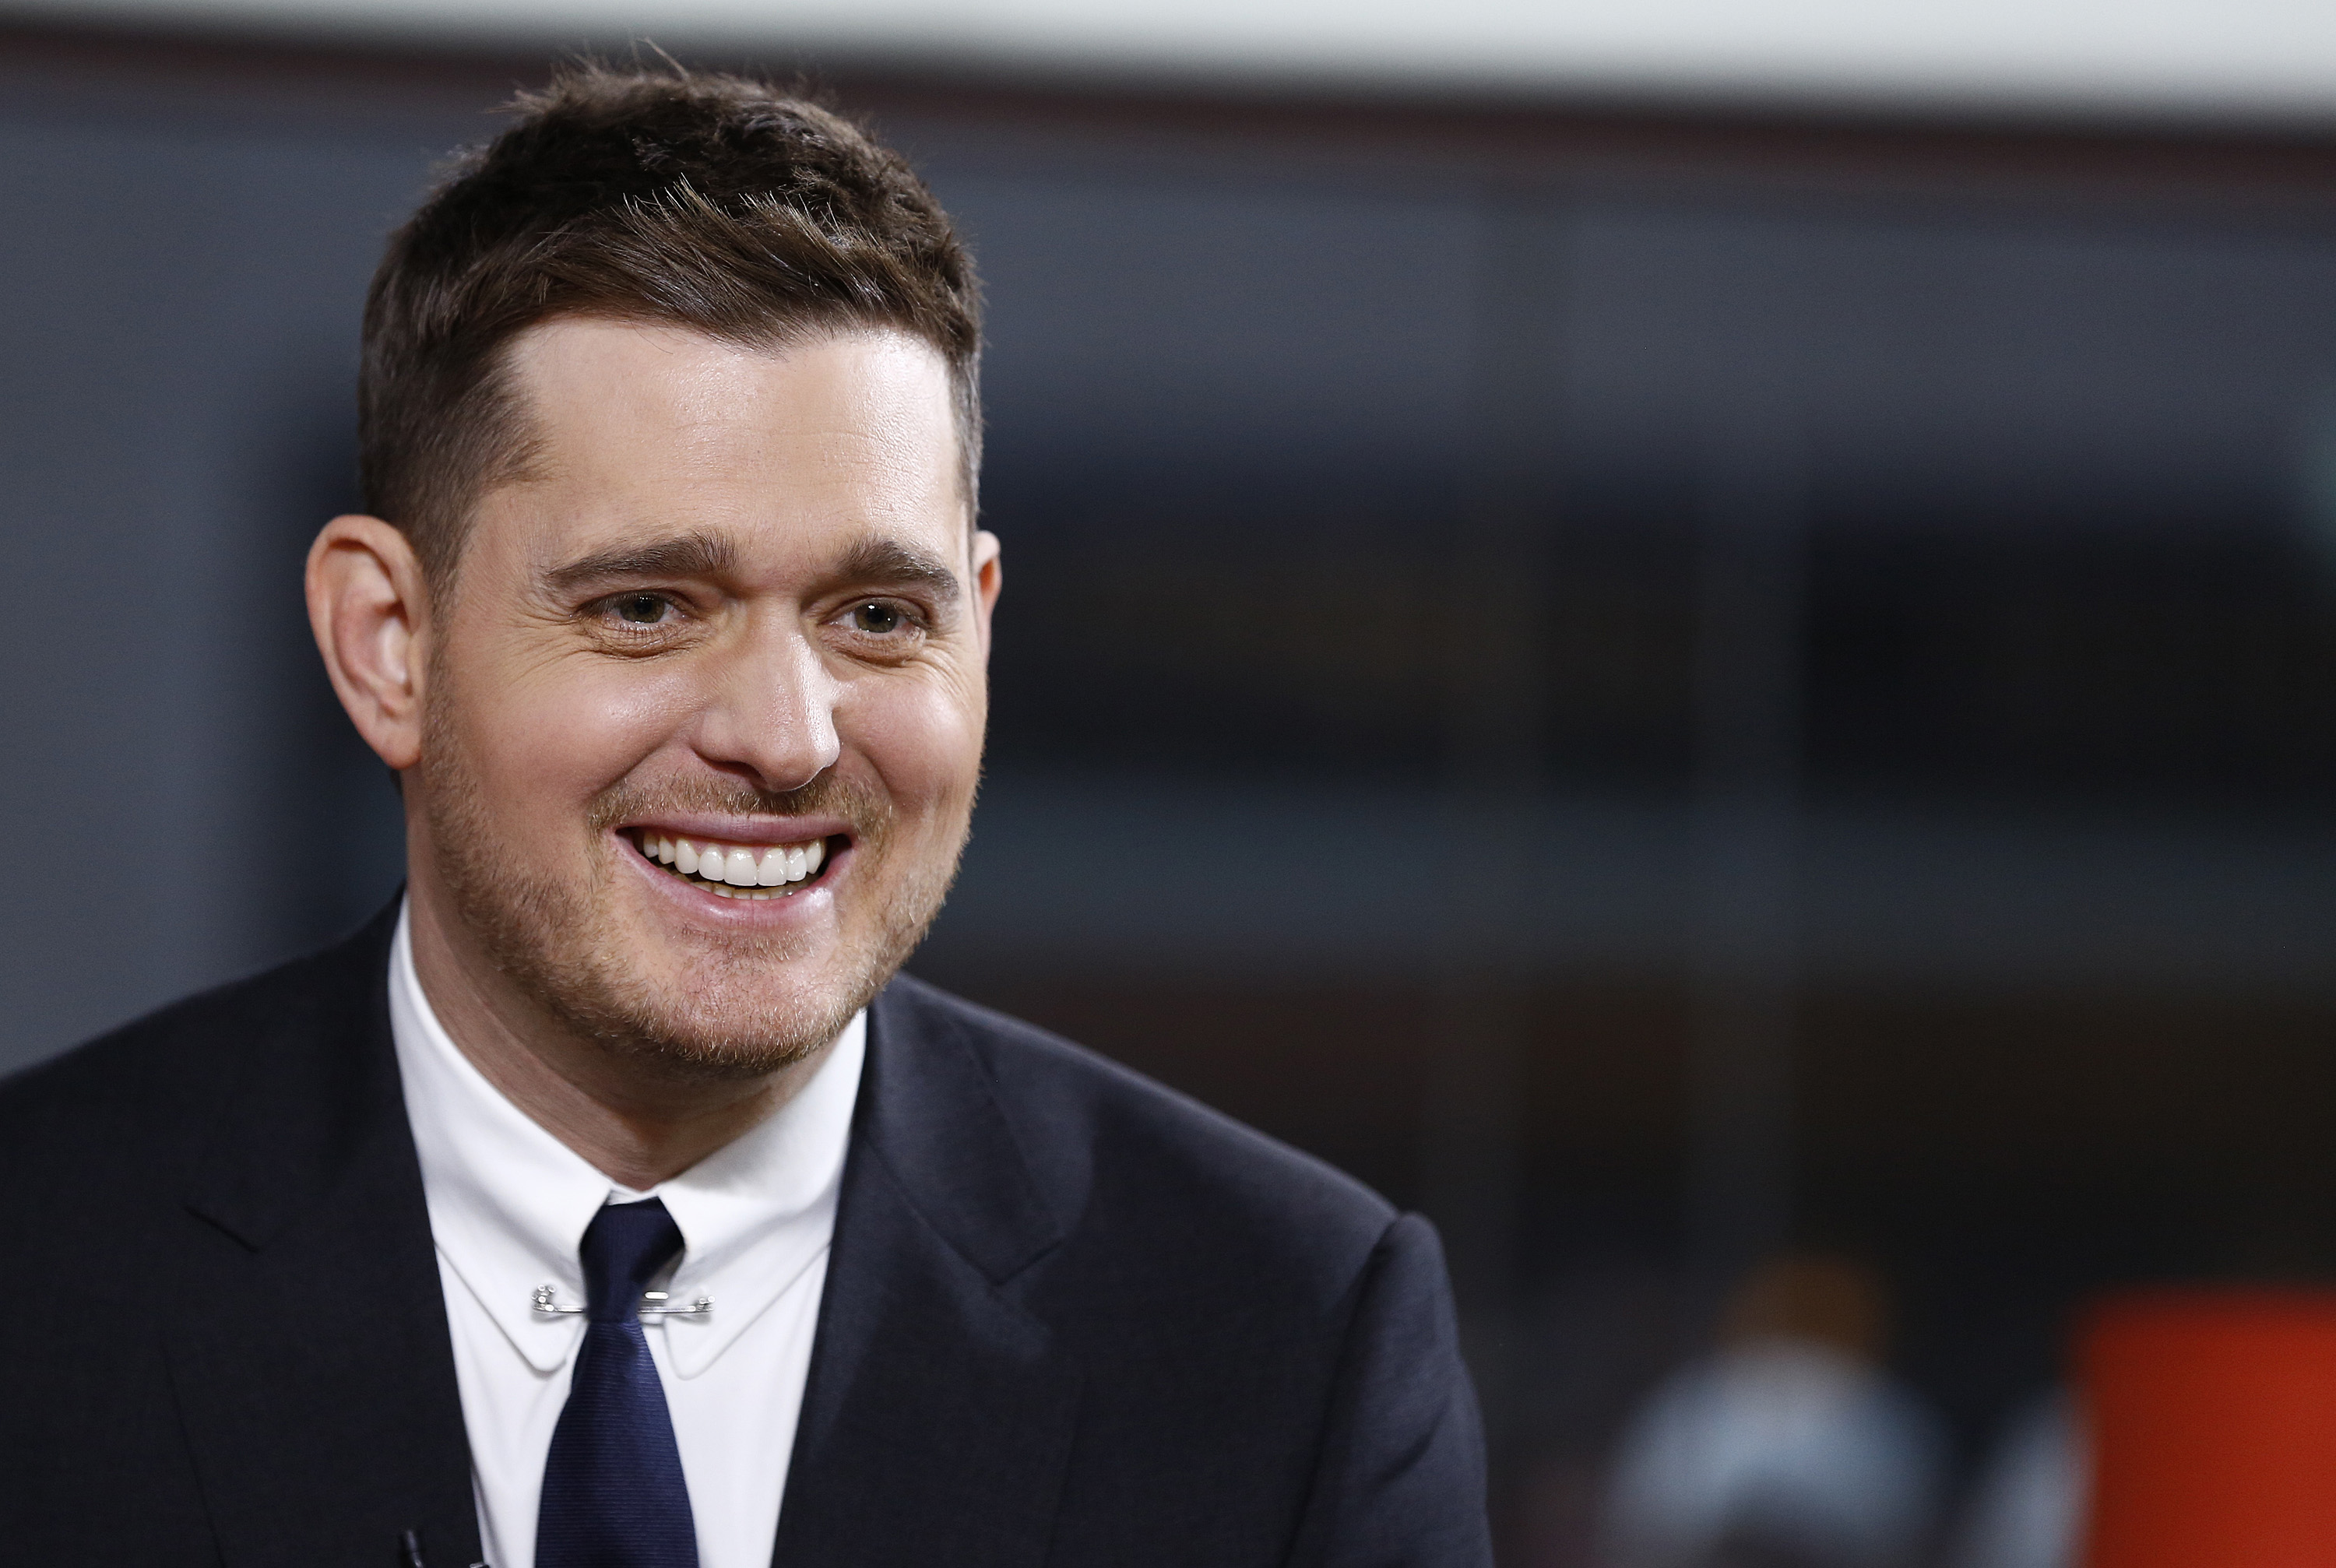 Michael Bublé on Season 62 of "Today" in 2013 | Source: Getty Images